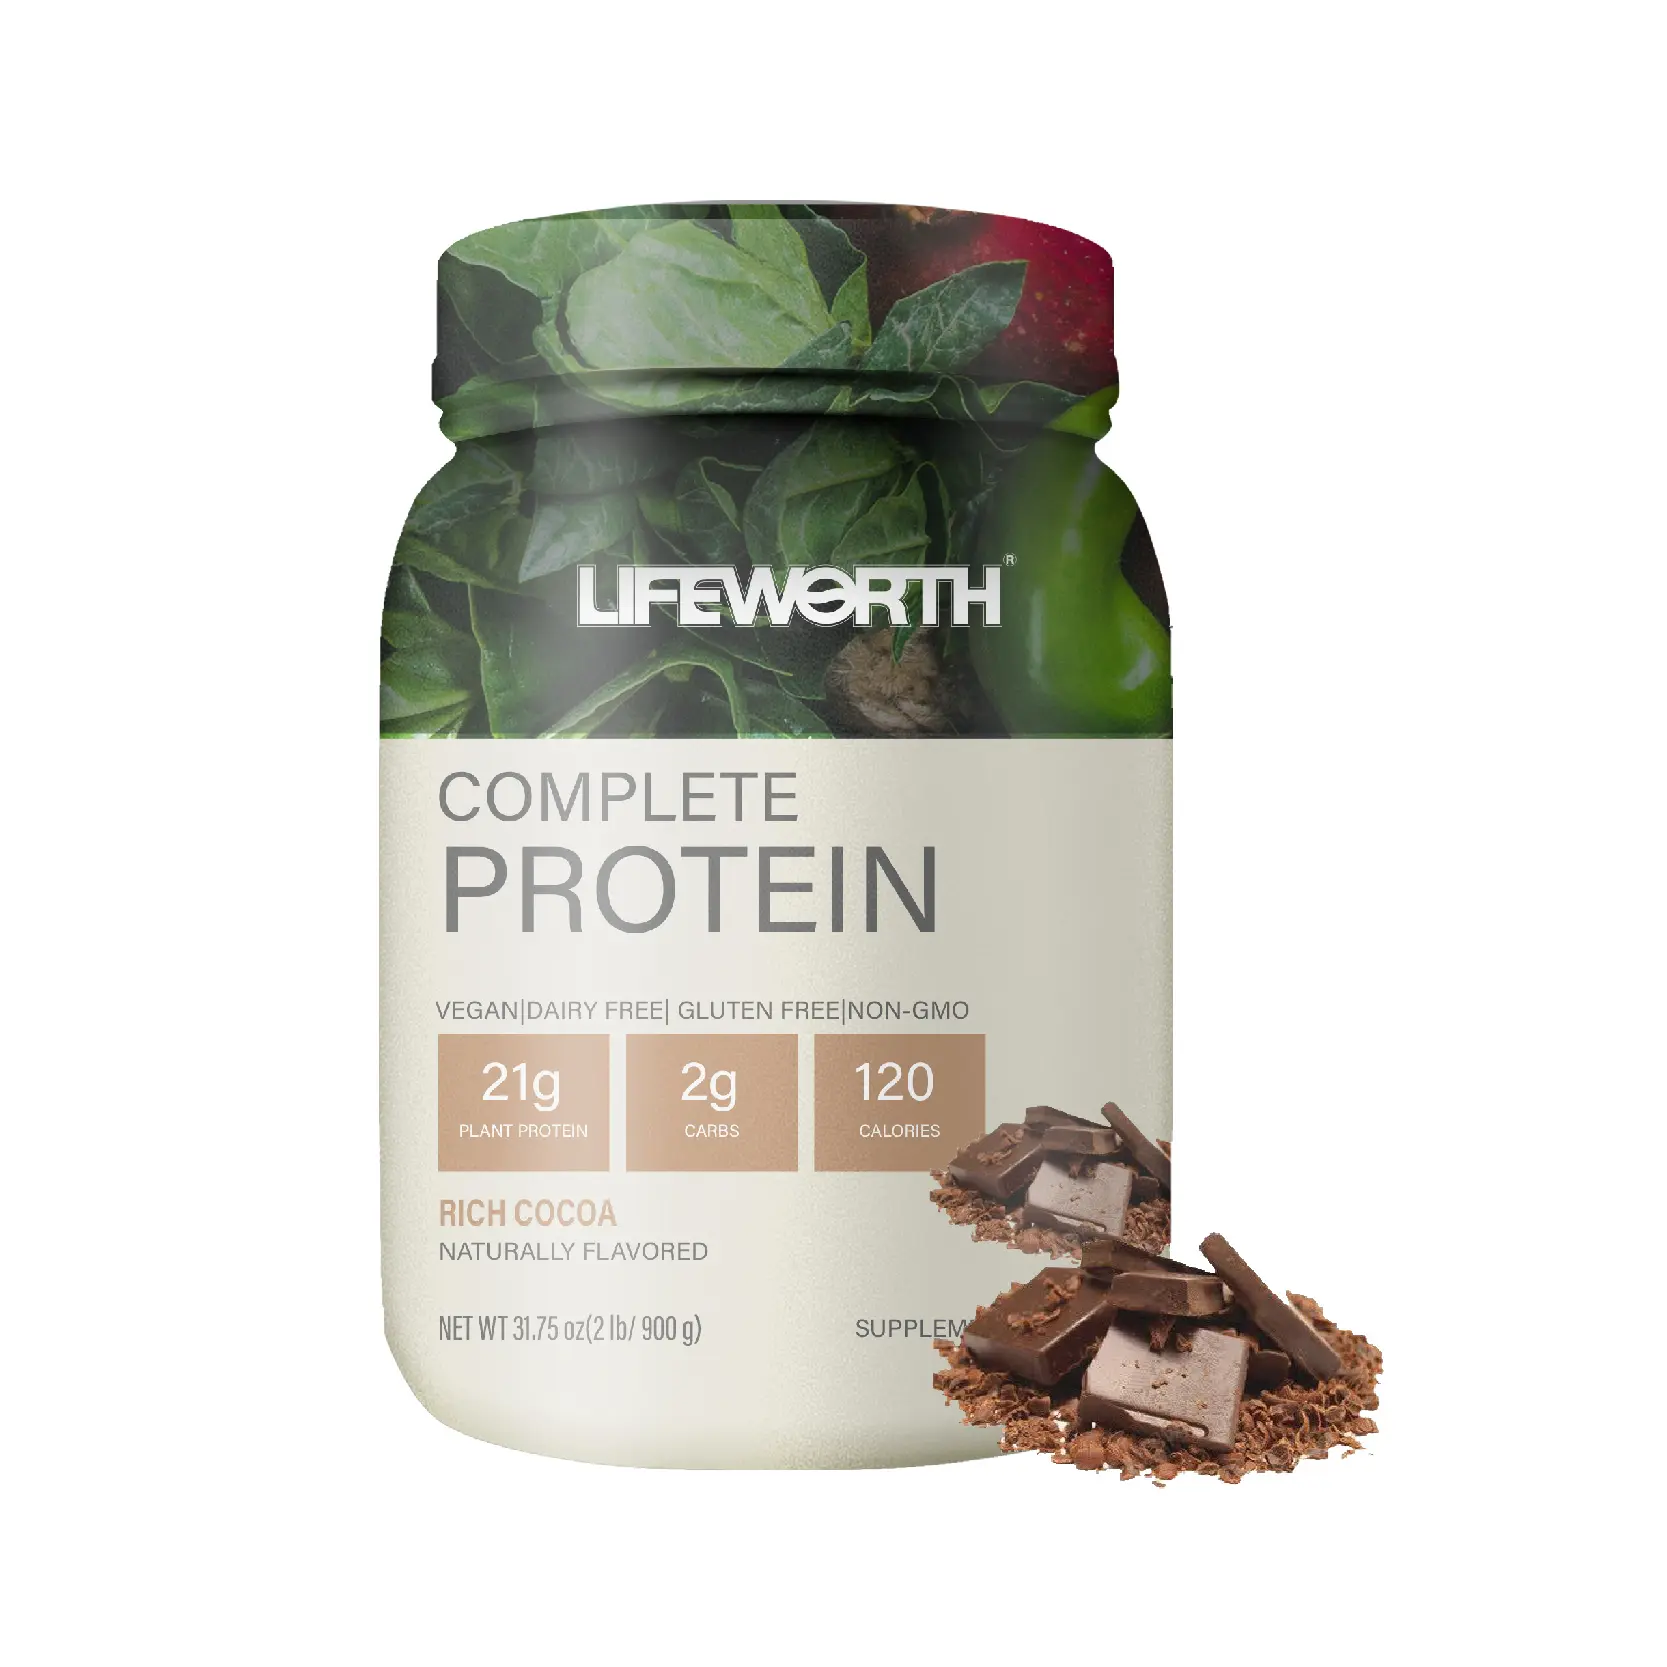 LIFEWORTH Custom Private Label Organic Plant Based Fiber Isolated Pea Protein Powder Shakes Meal Replacement Shake